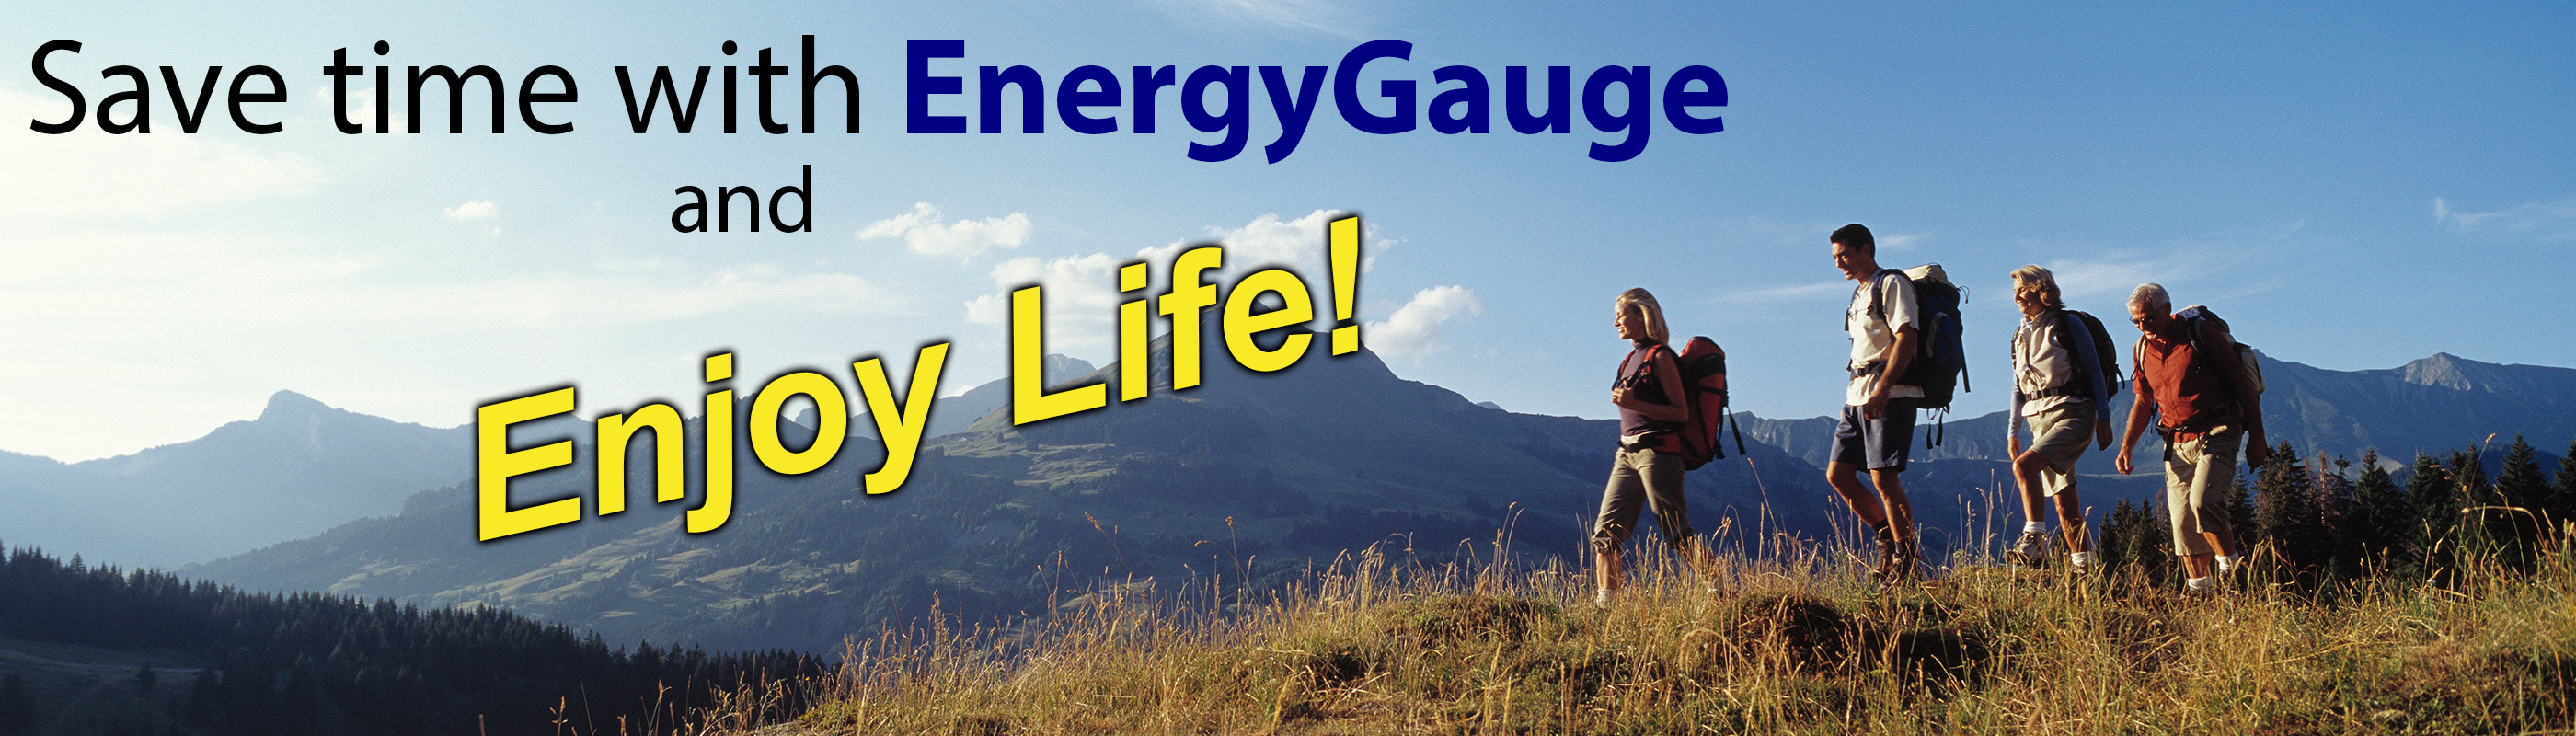 Save time with EnergyGauge